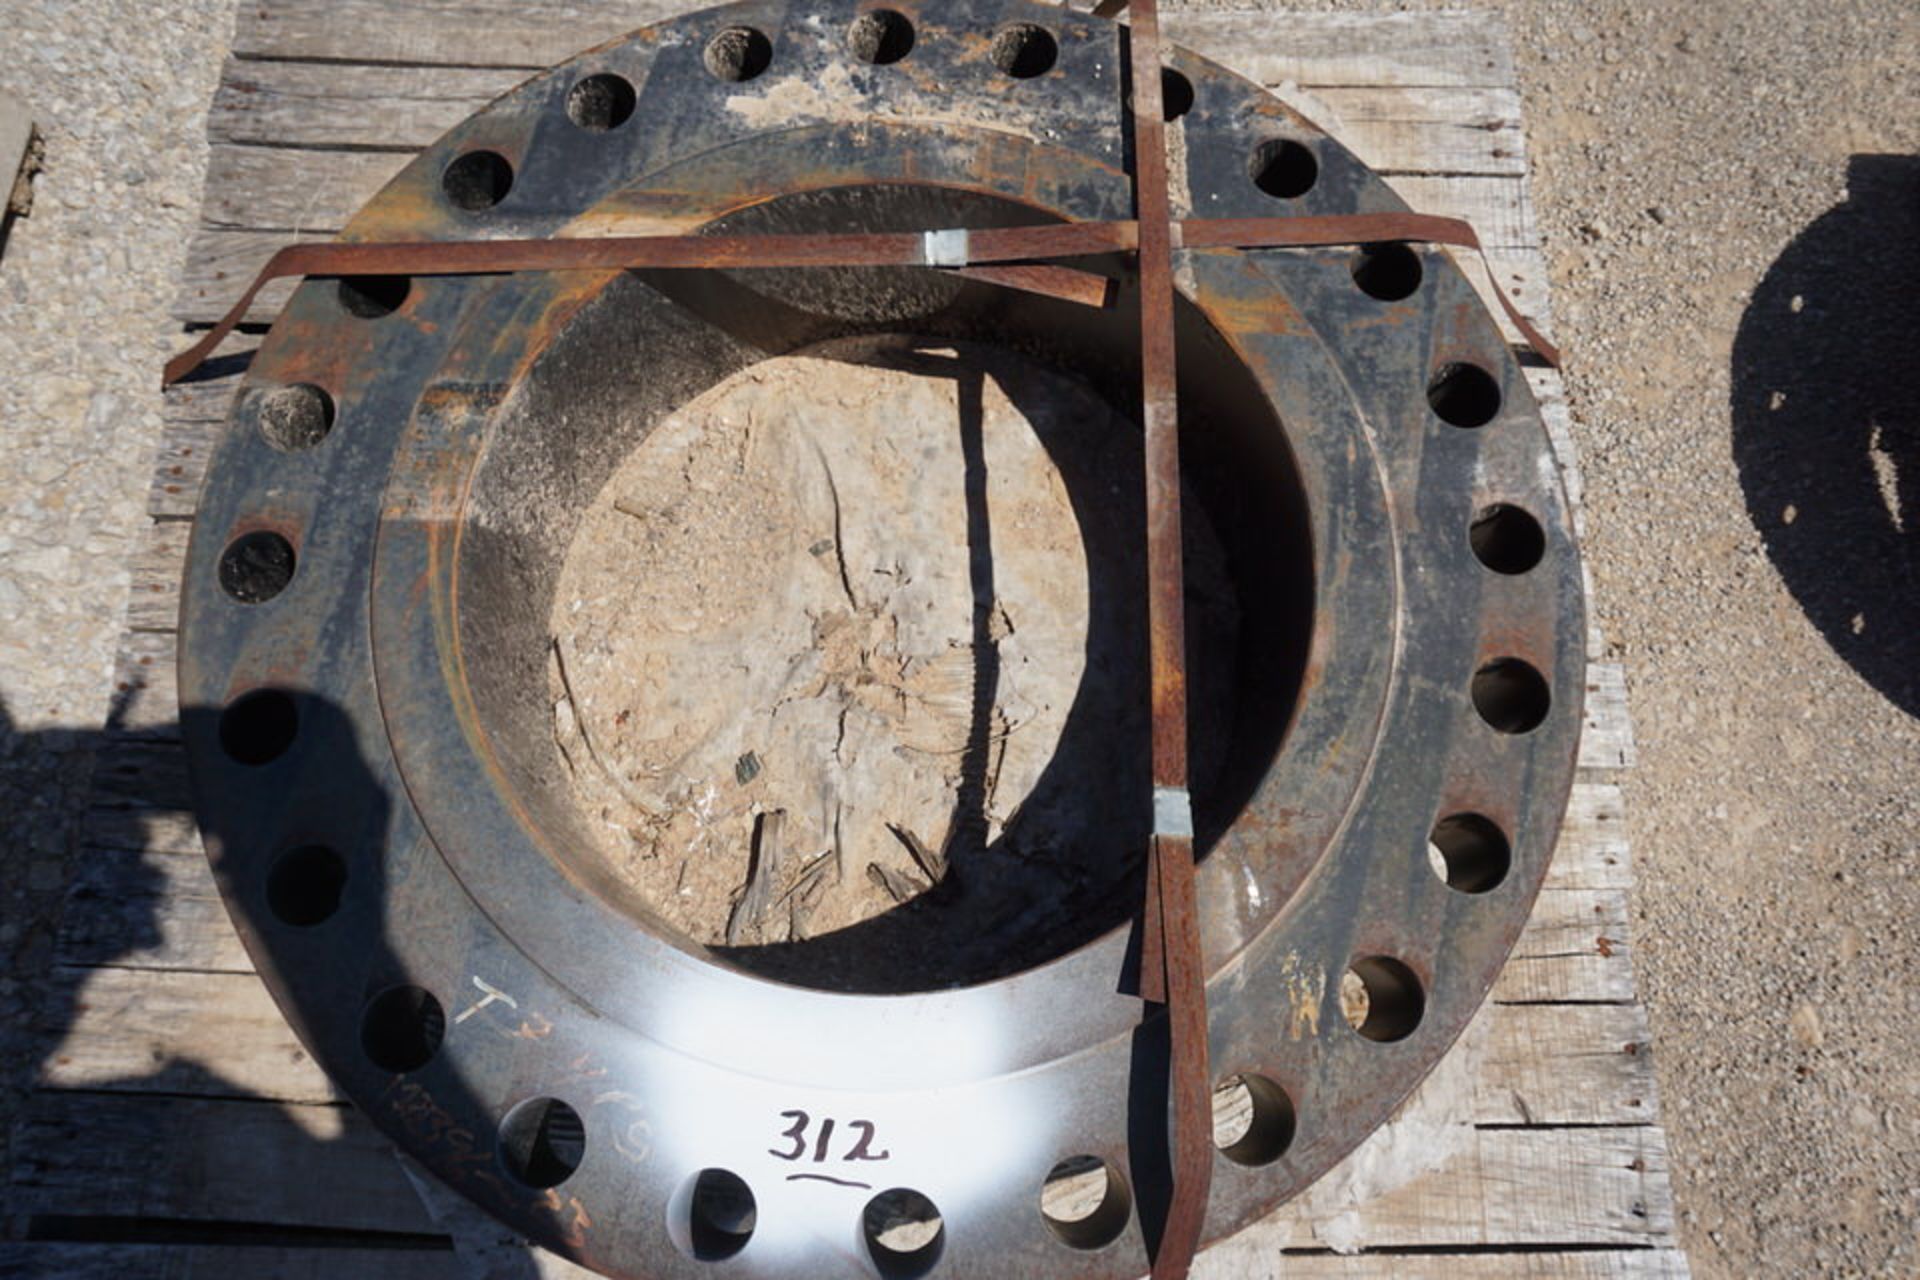 LG TANK FLANGE APPROX 32" DIA W/ 20" HOLE - Image 2 of 2